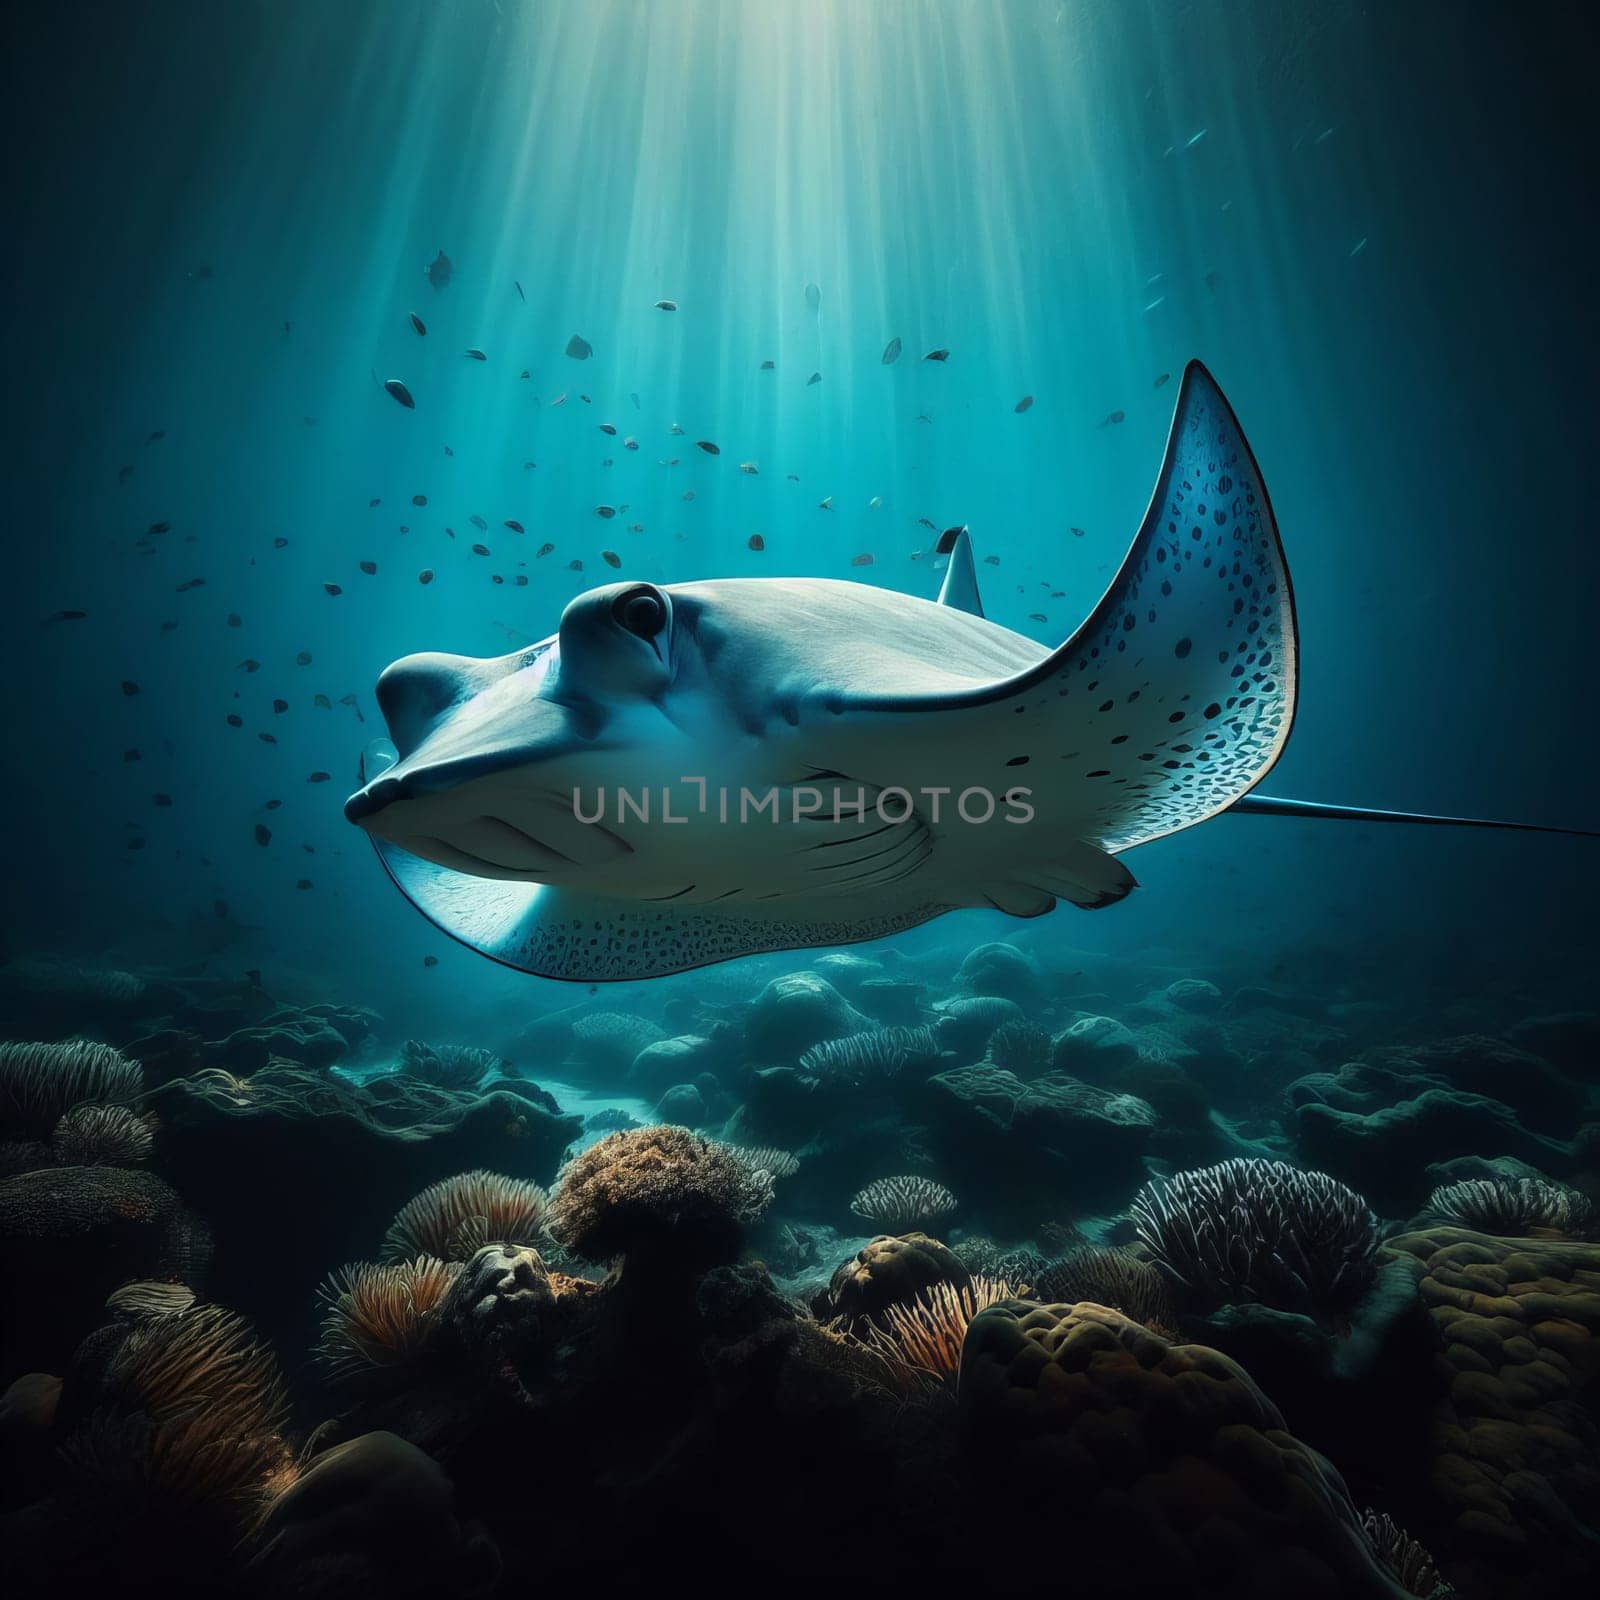 A stingray gracefully swims in the ocean, surrounded by a school of fish and coral, under the dreamy blue sea